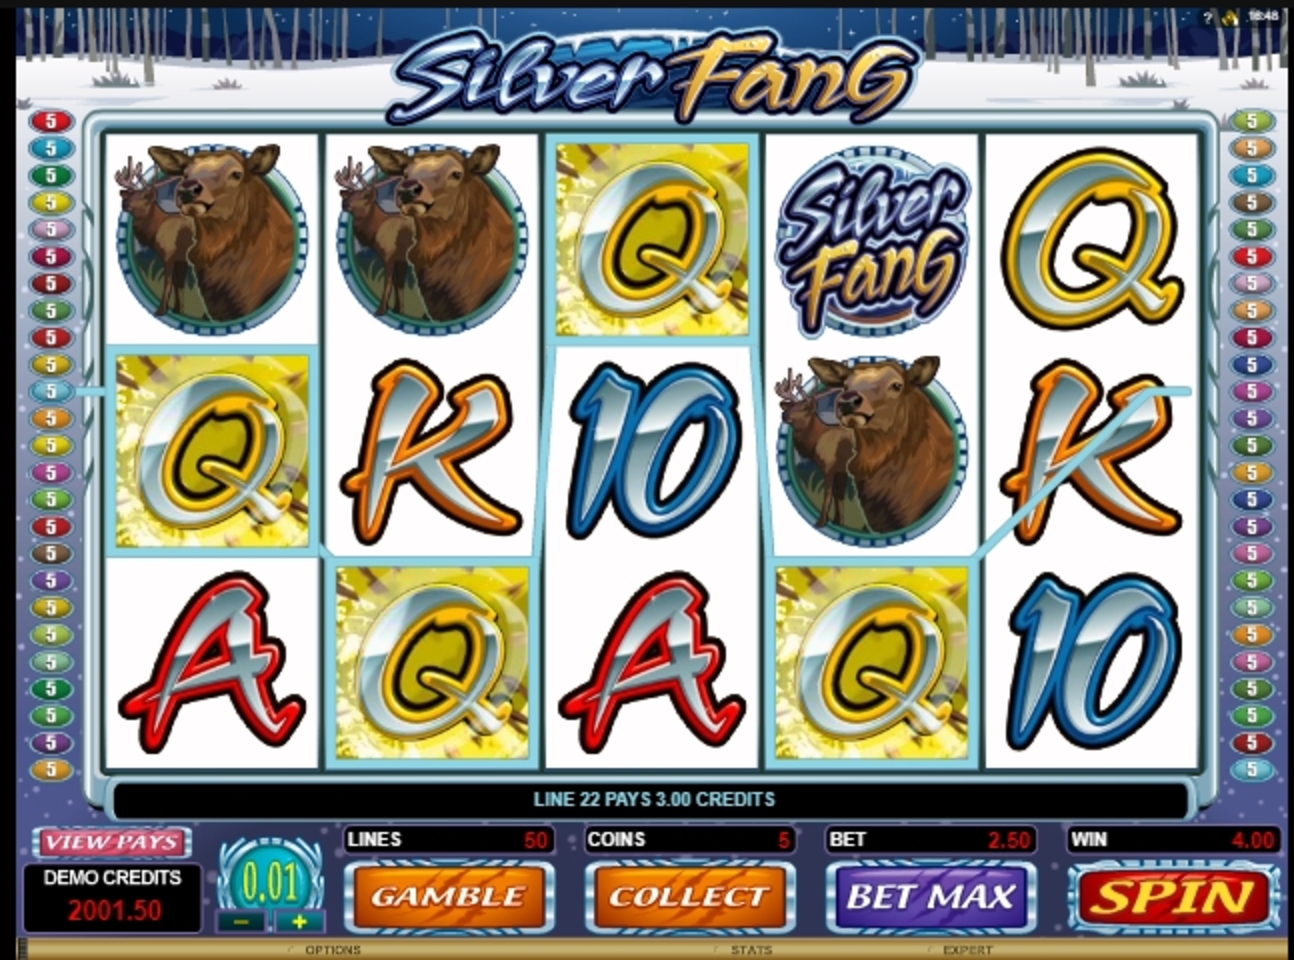 Win Money in Silver Fang Free Slot Game by Microgaming